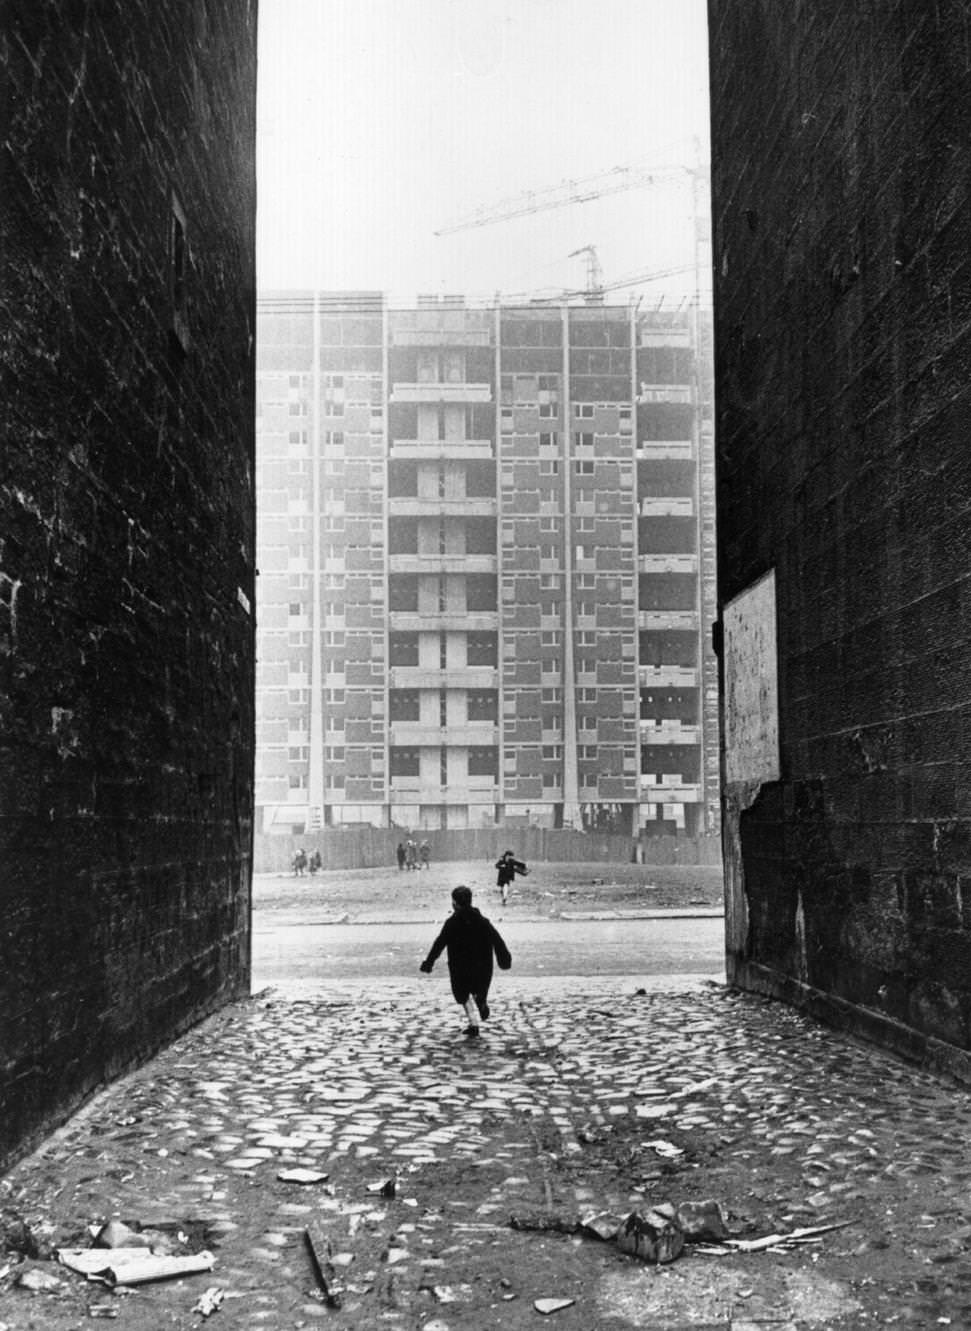 A high-rise block of flats under construction in the Gorbals area of Glasgow, 1960